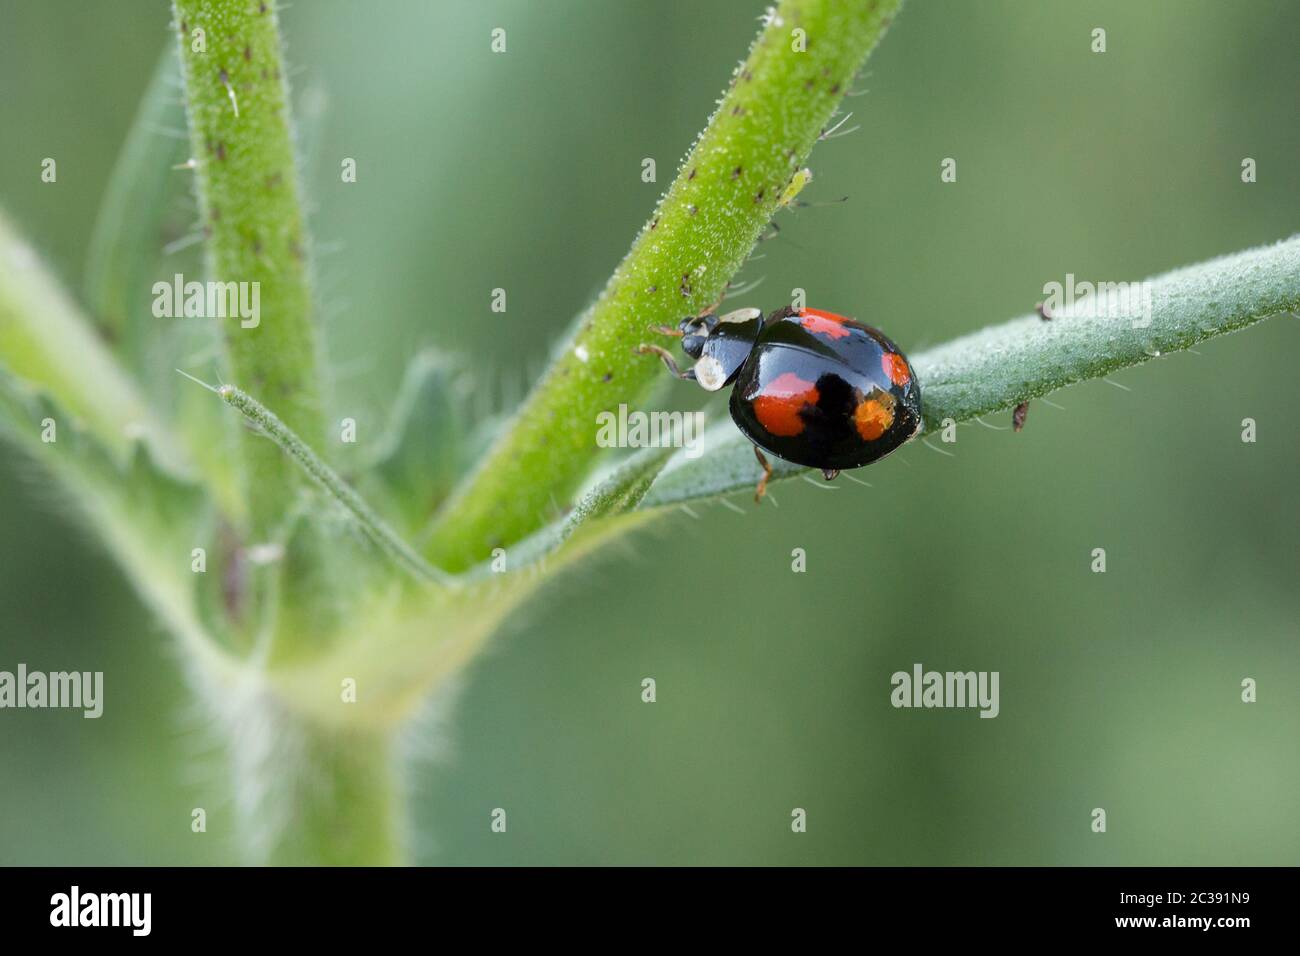 Ladybird shiny black body with four red spots on wing cases and a white marking each side behind the head. Small beetle that feeds on aphids in summer Stock Photo